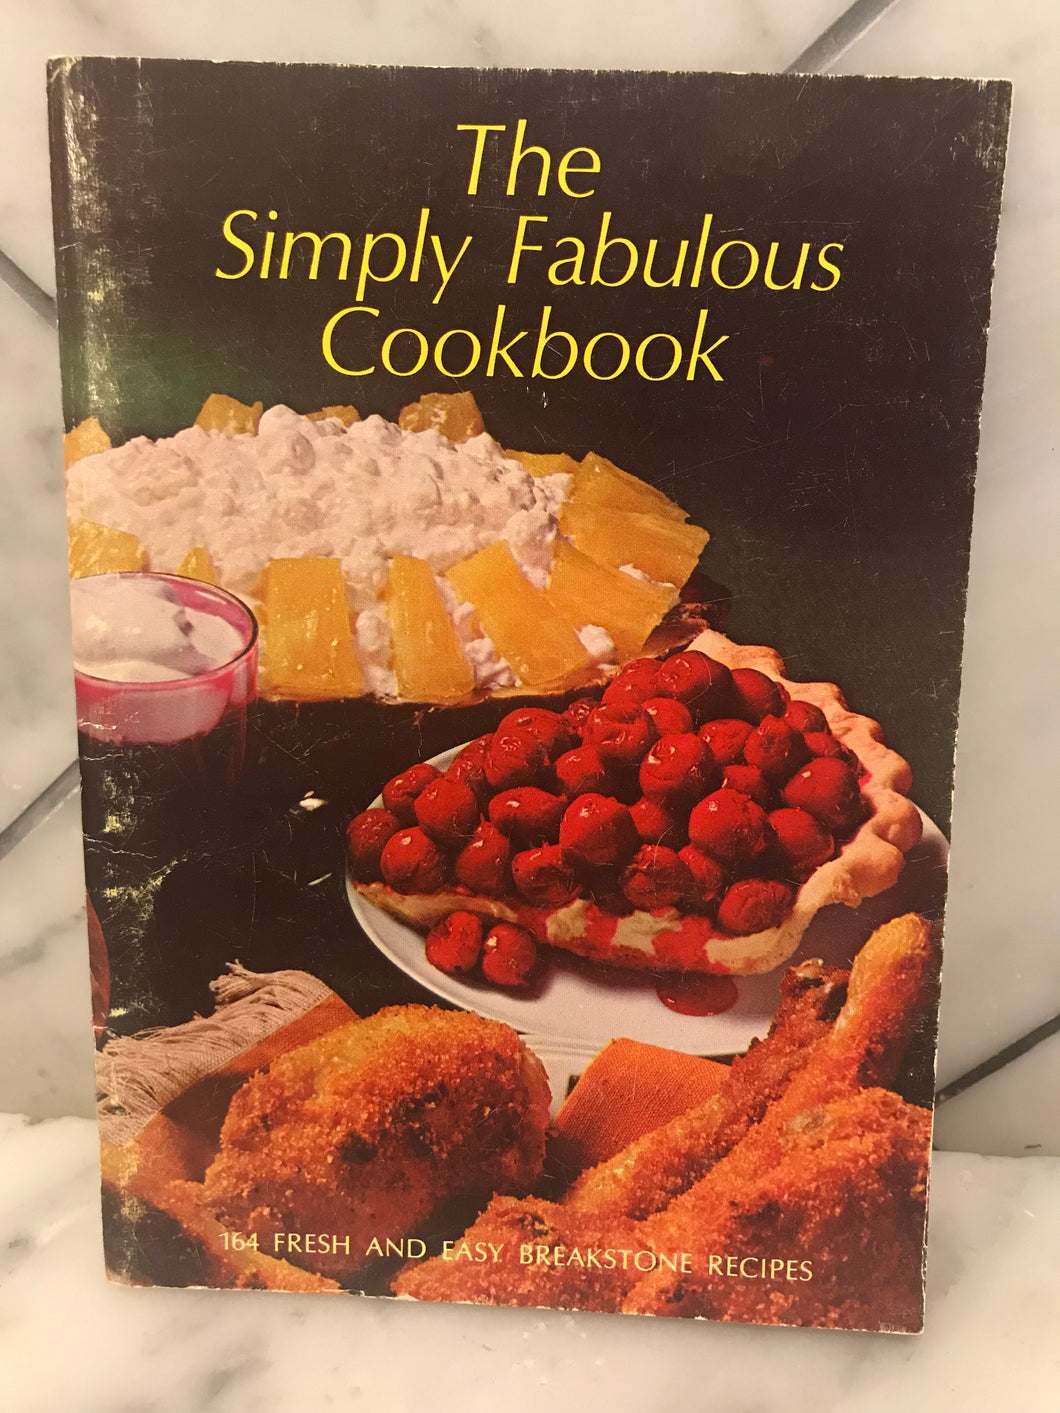 The Simply Fabulous Cookbook, 164 Fresh and Easy Breakstone Recipes